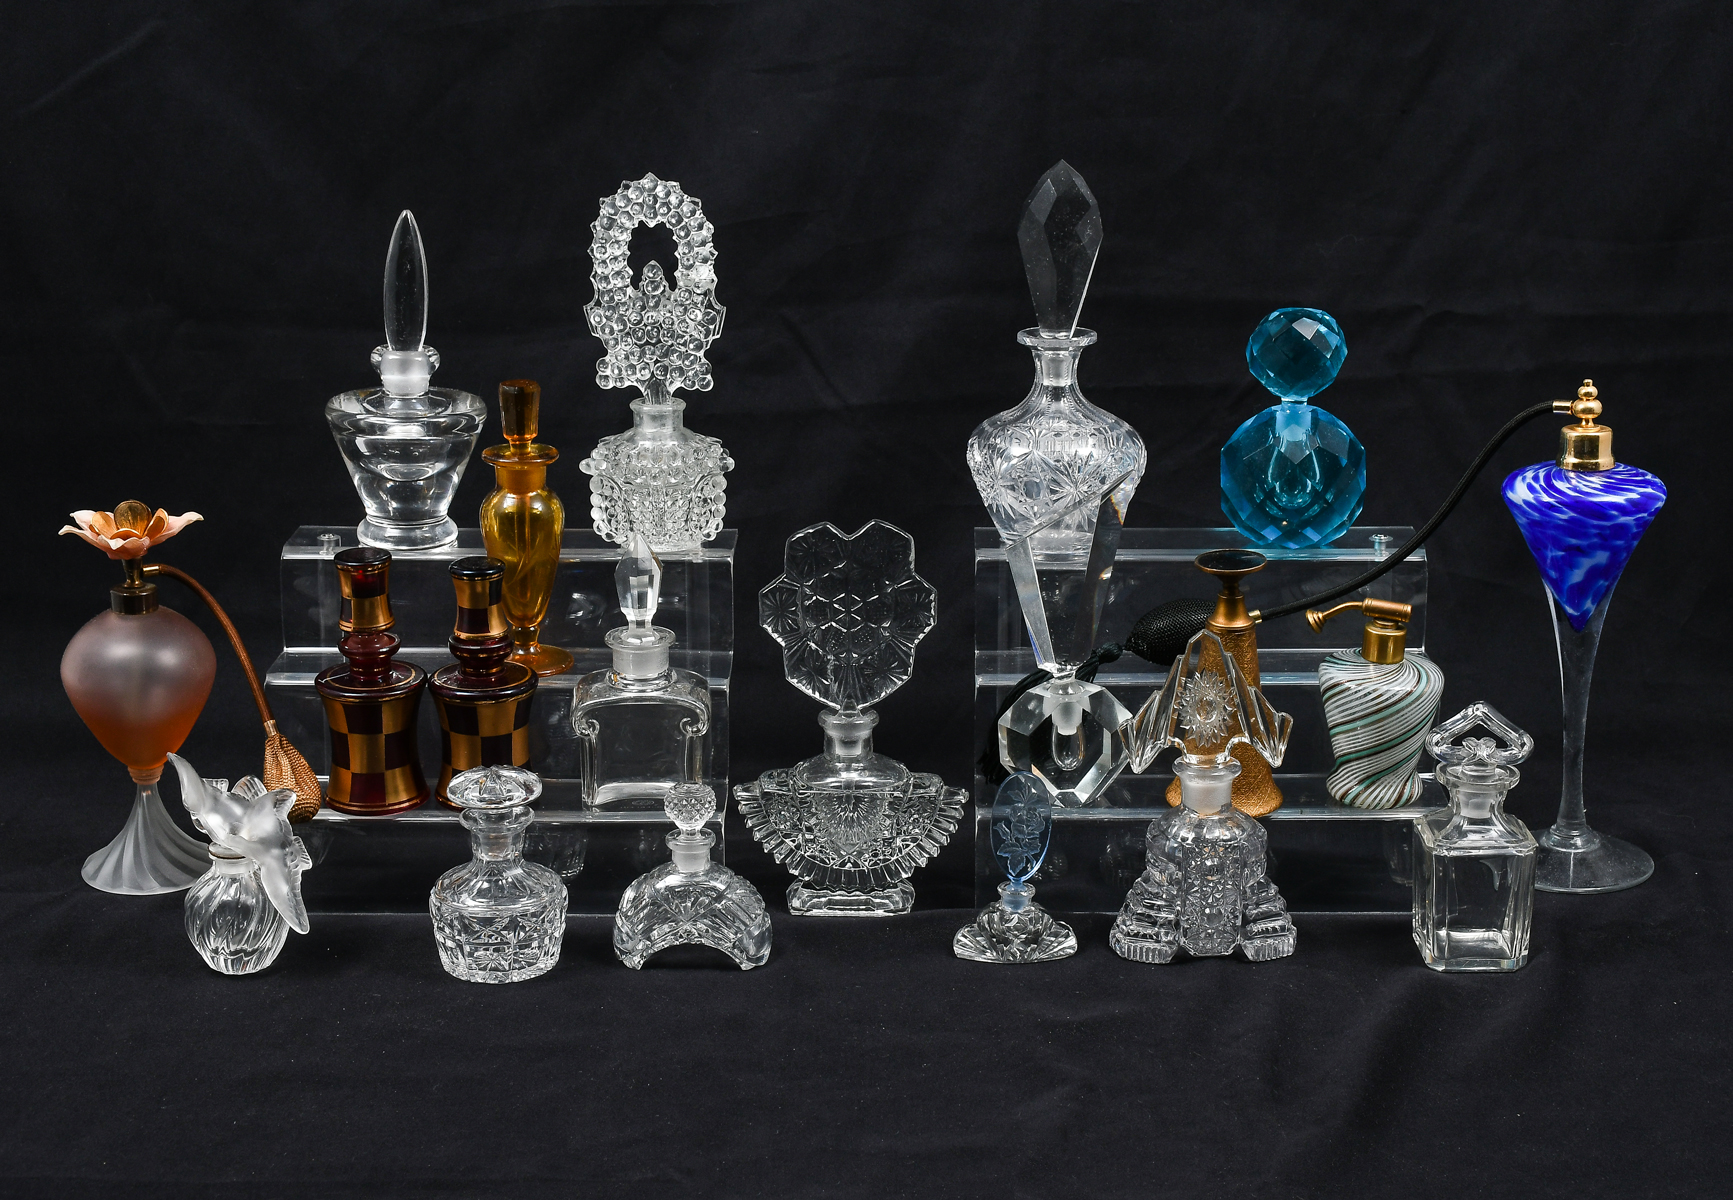 20 PC. PERFUME BOTTLES COLLECTION: